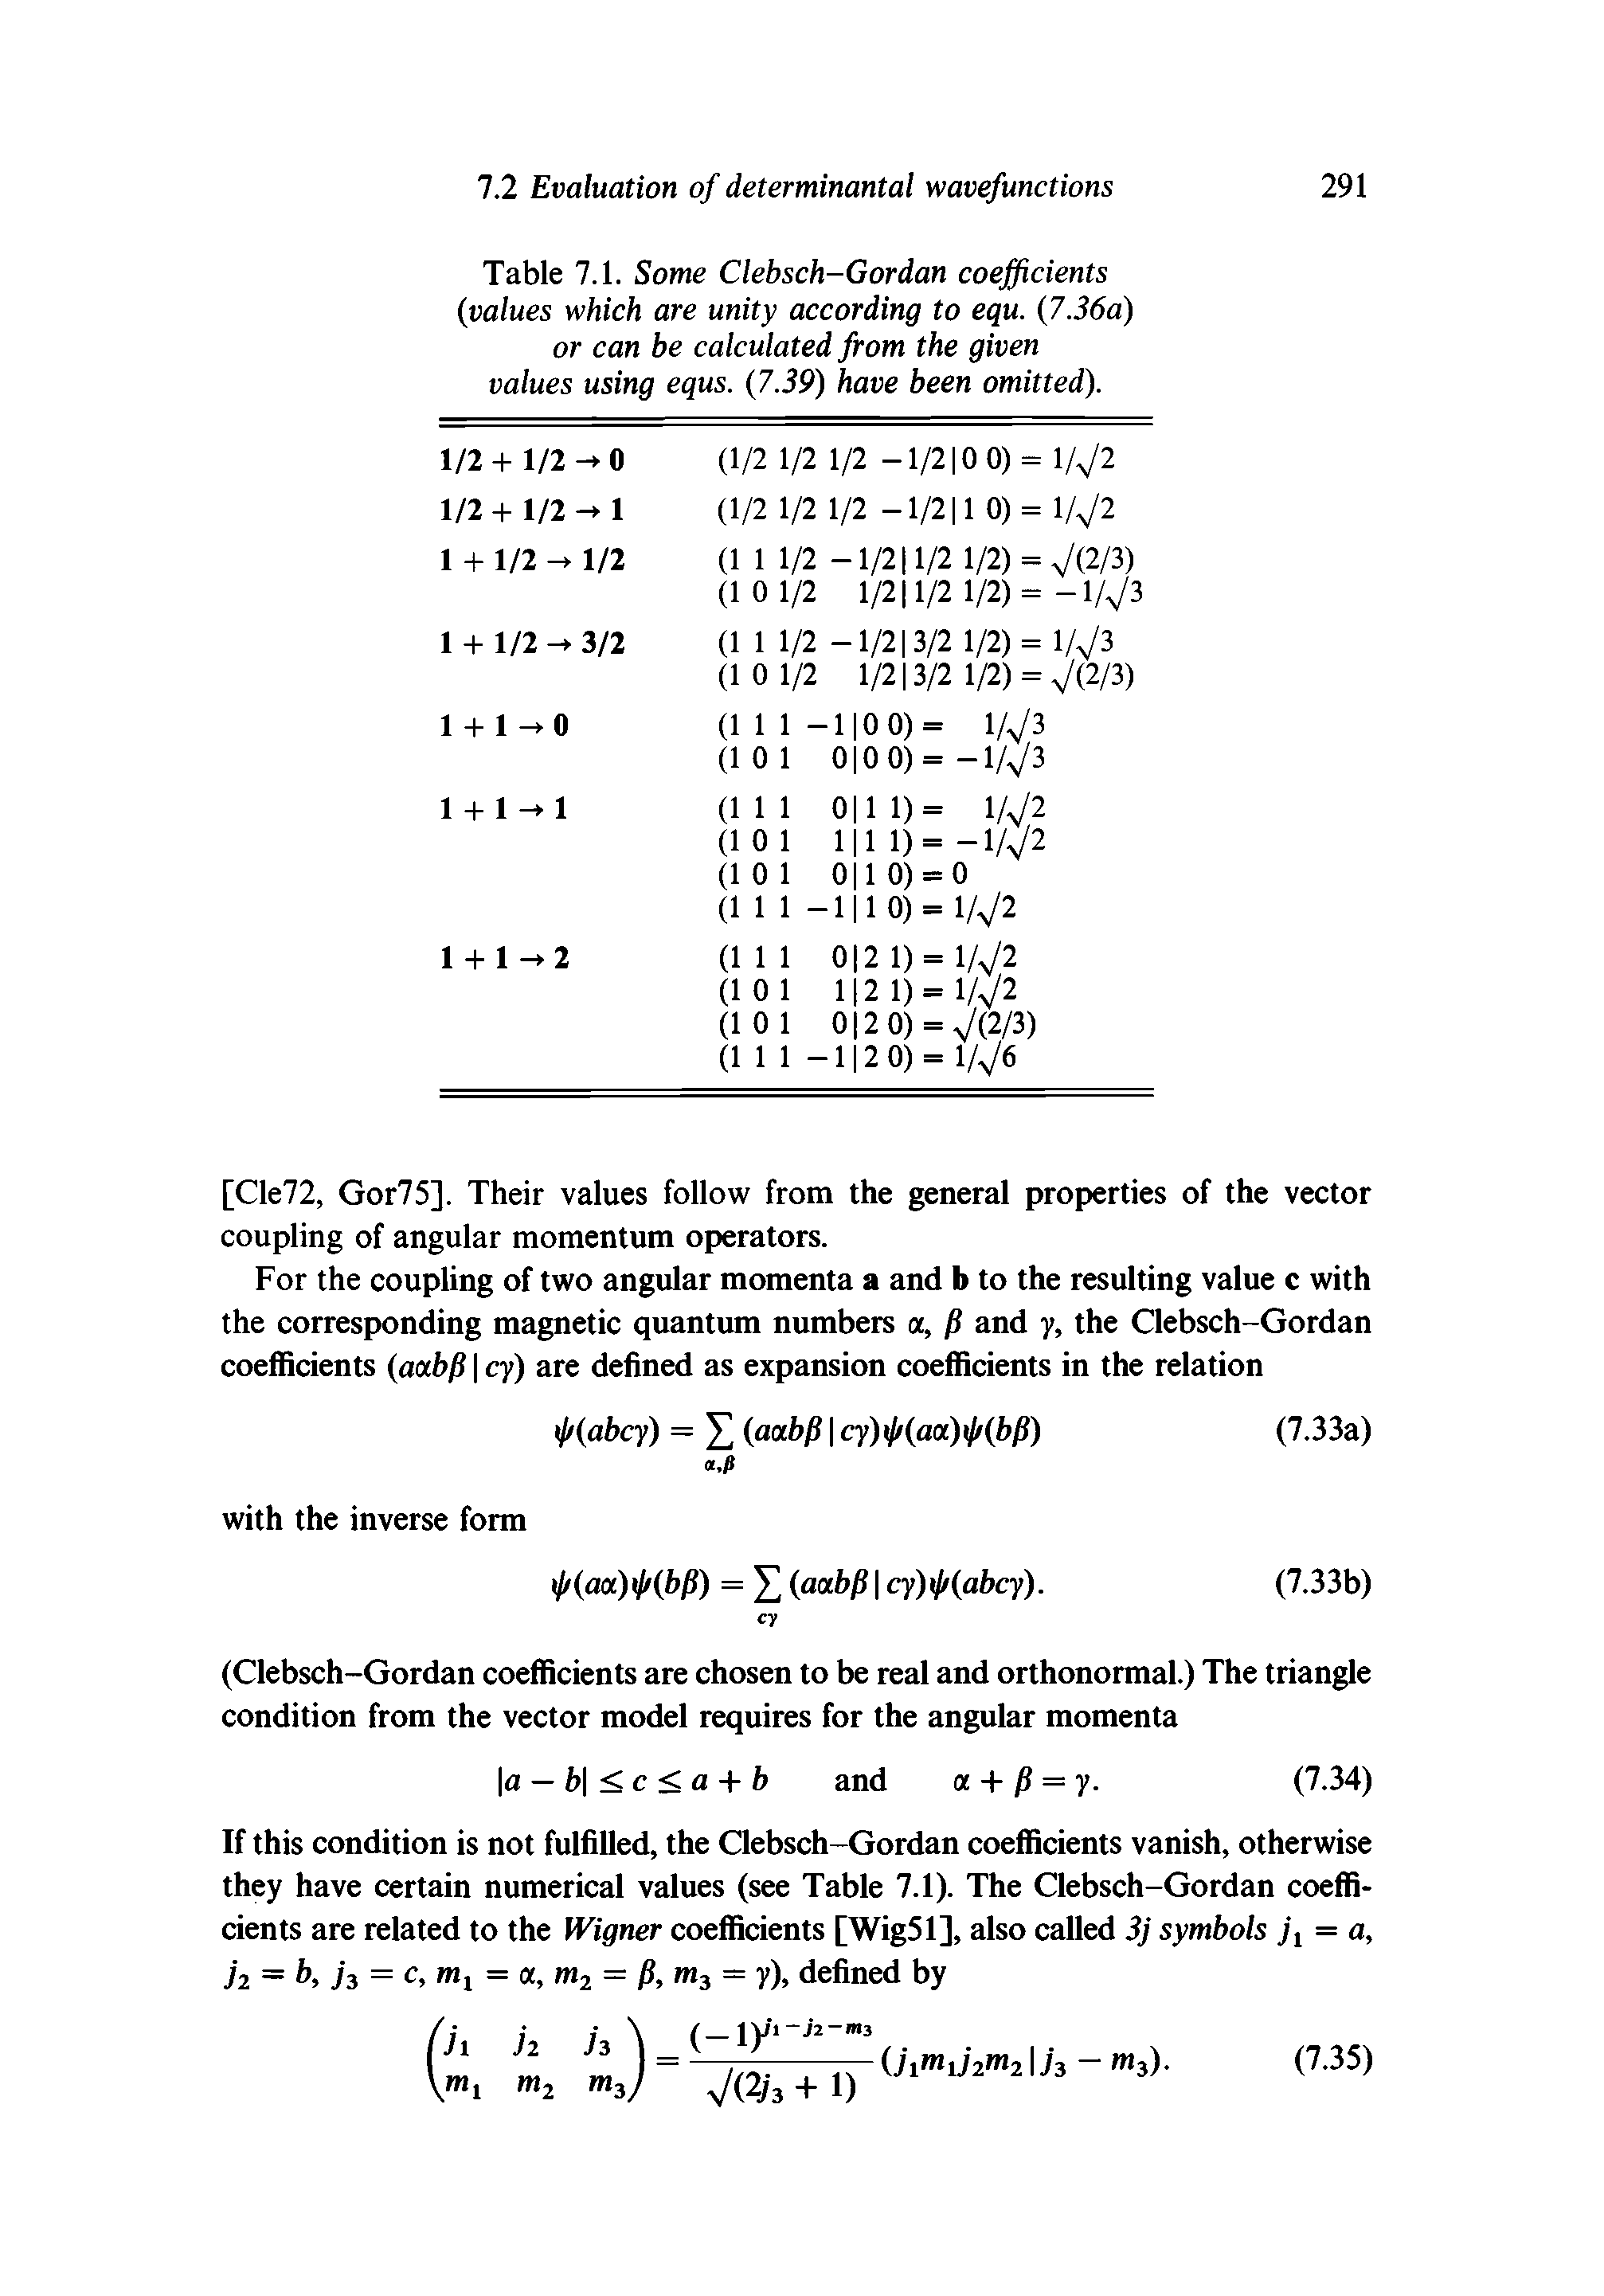 Table 7.1. Some Clebsch-Gordan coefficients (values which are unity according to equ. (7.36a) or can be calculated from the given values using equs. (7.39) have been omitted).